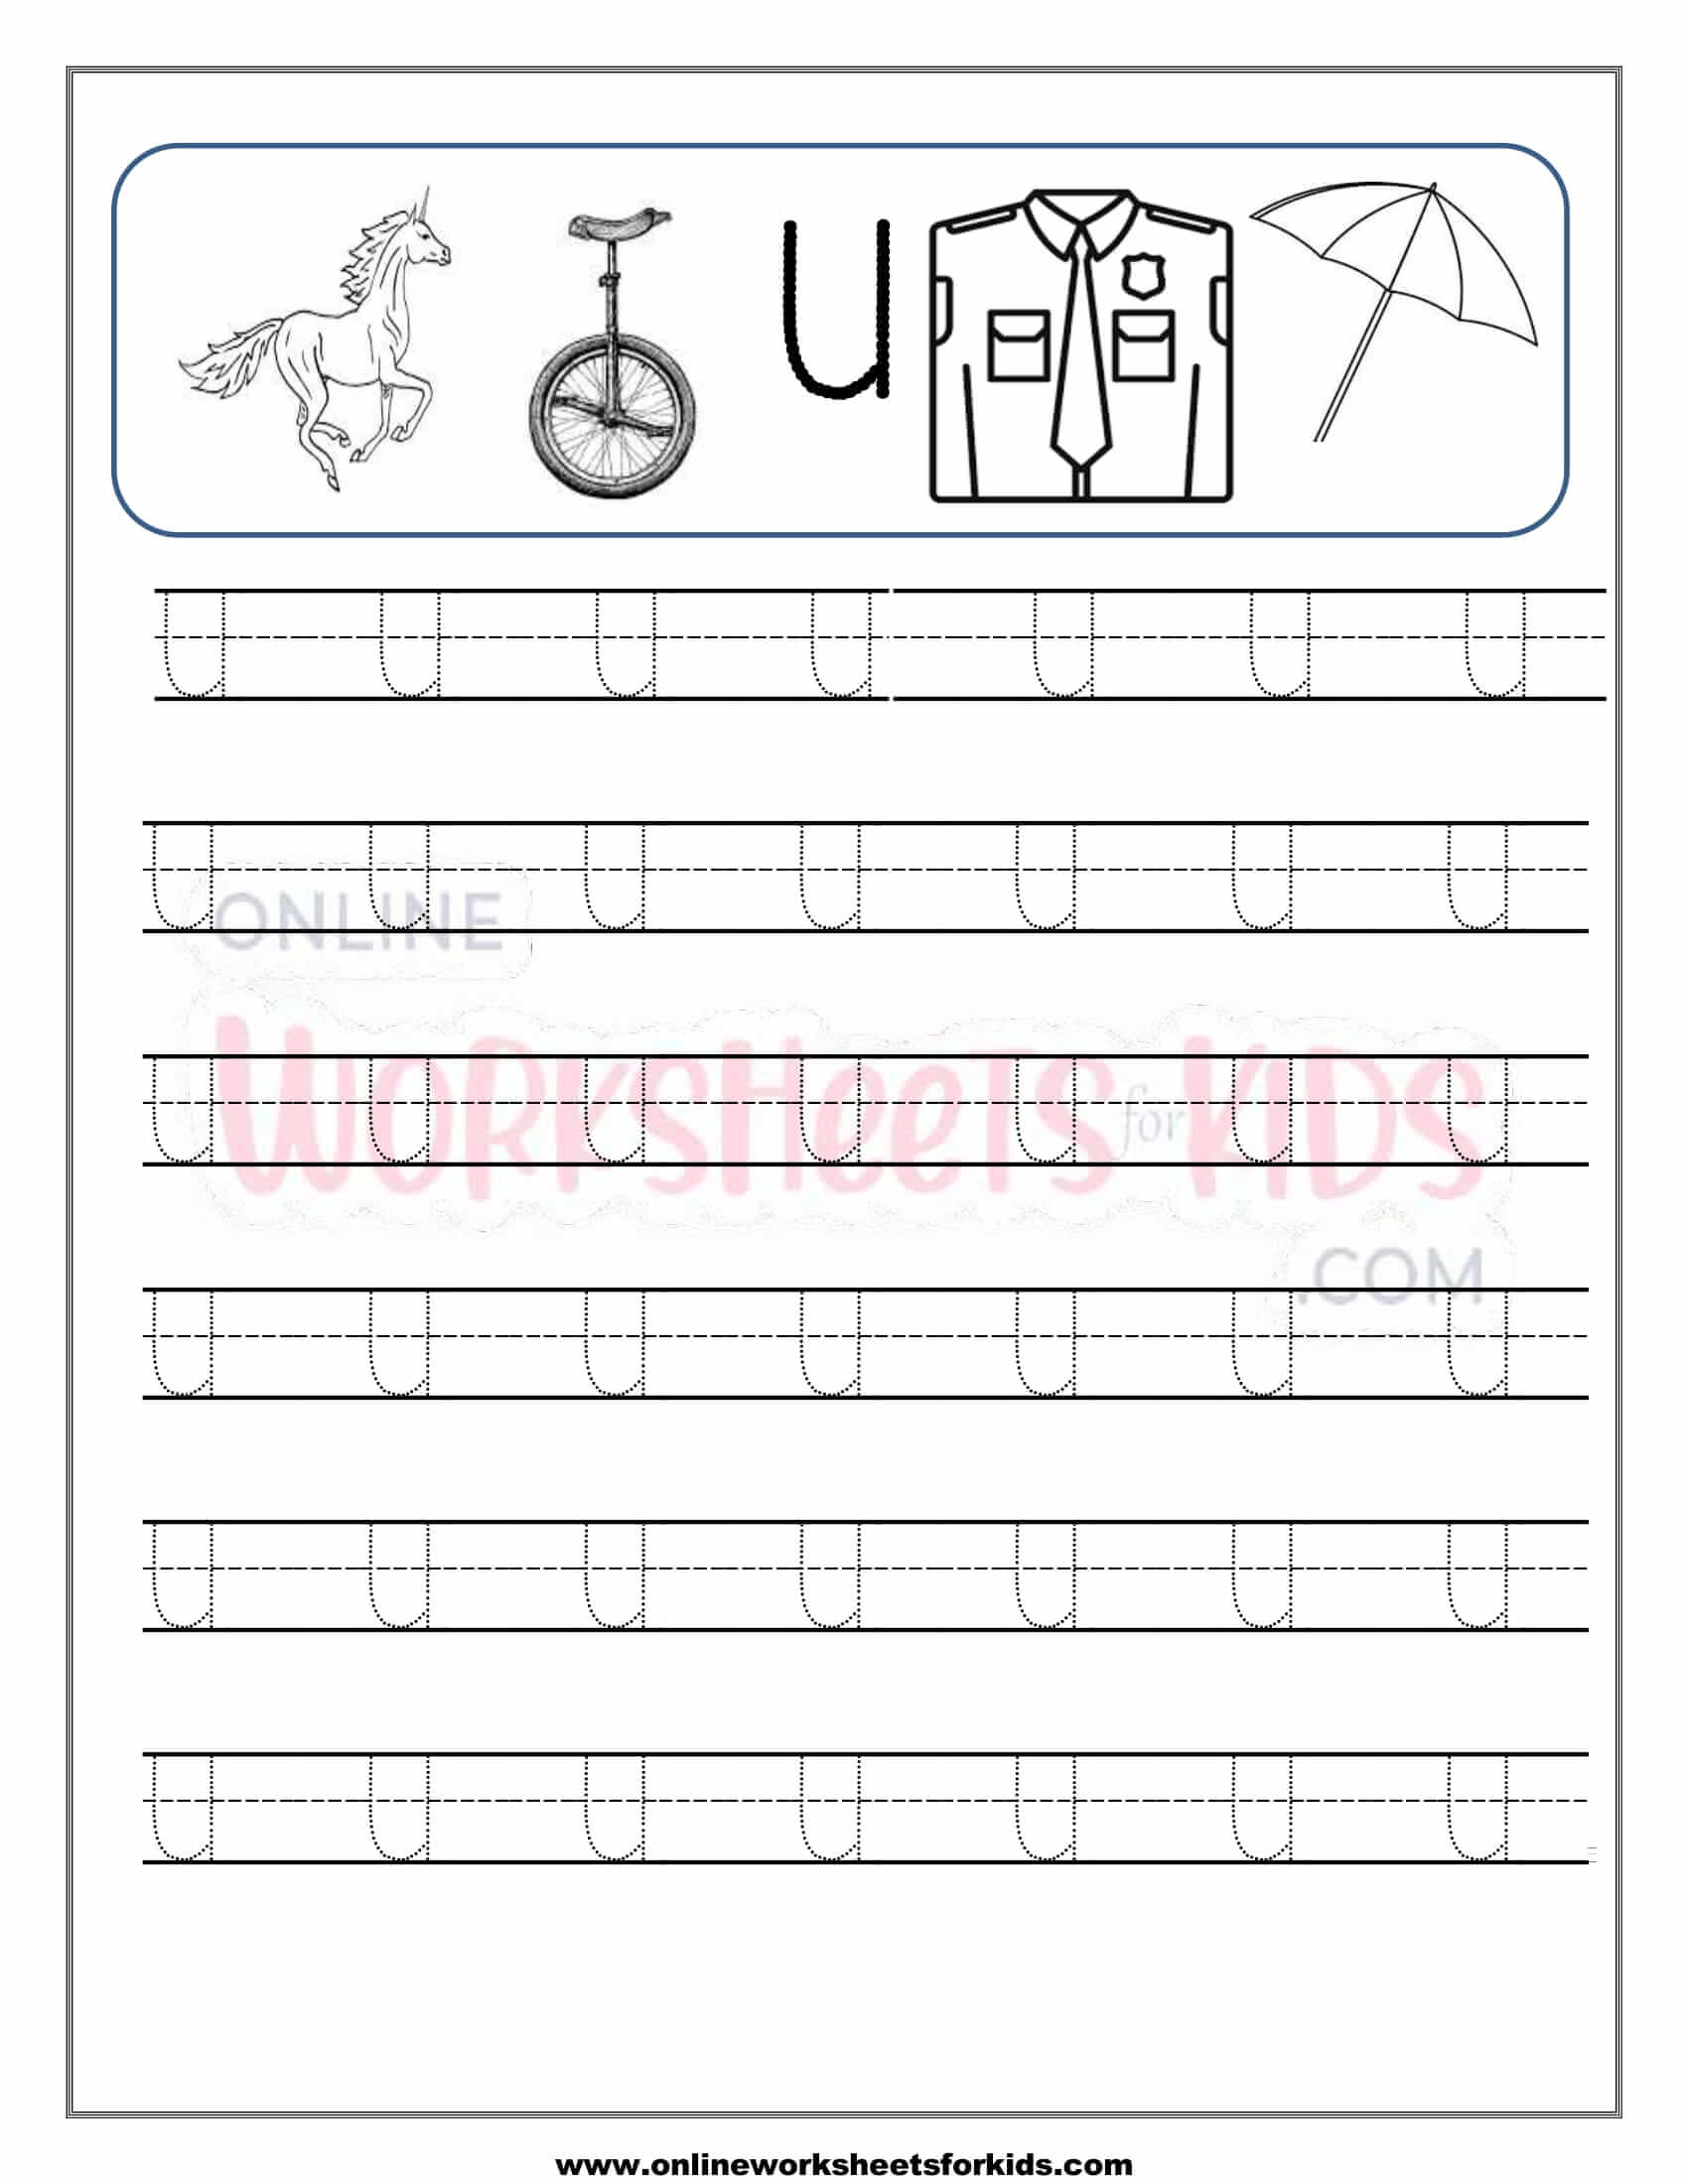 letter-tracing-worksheet-capital-letters-4